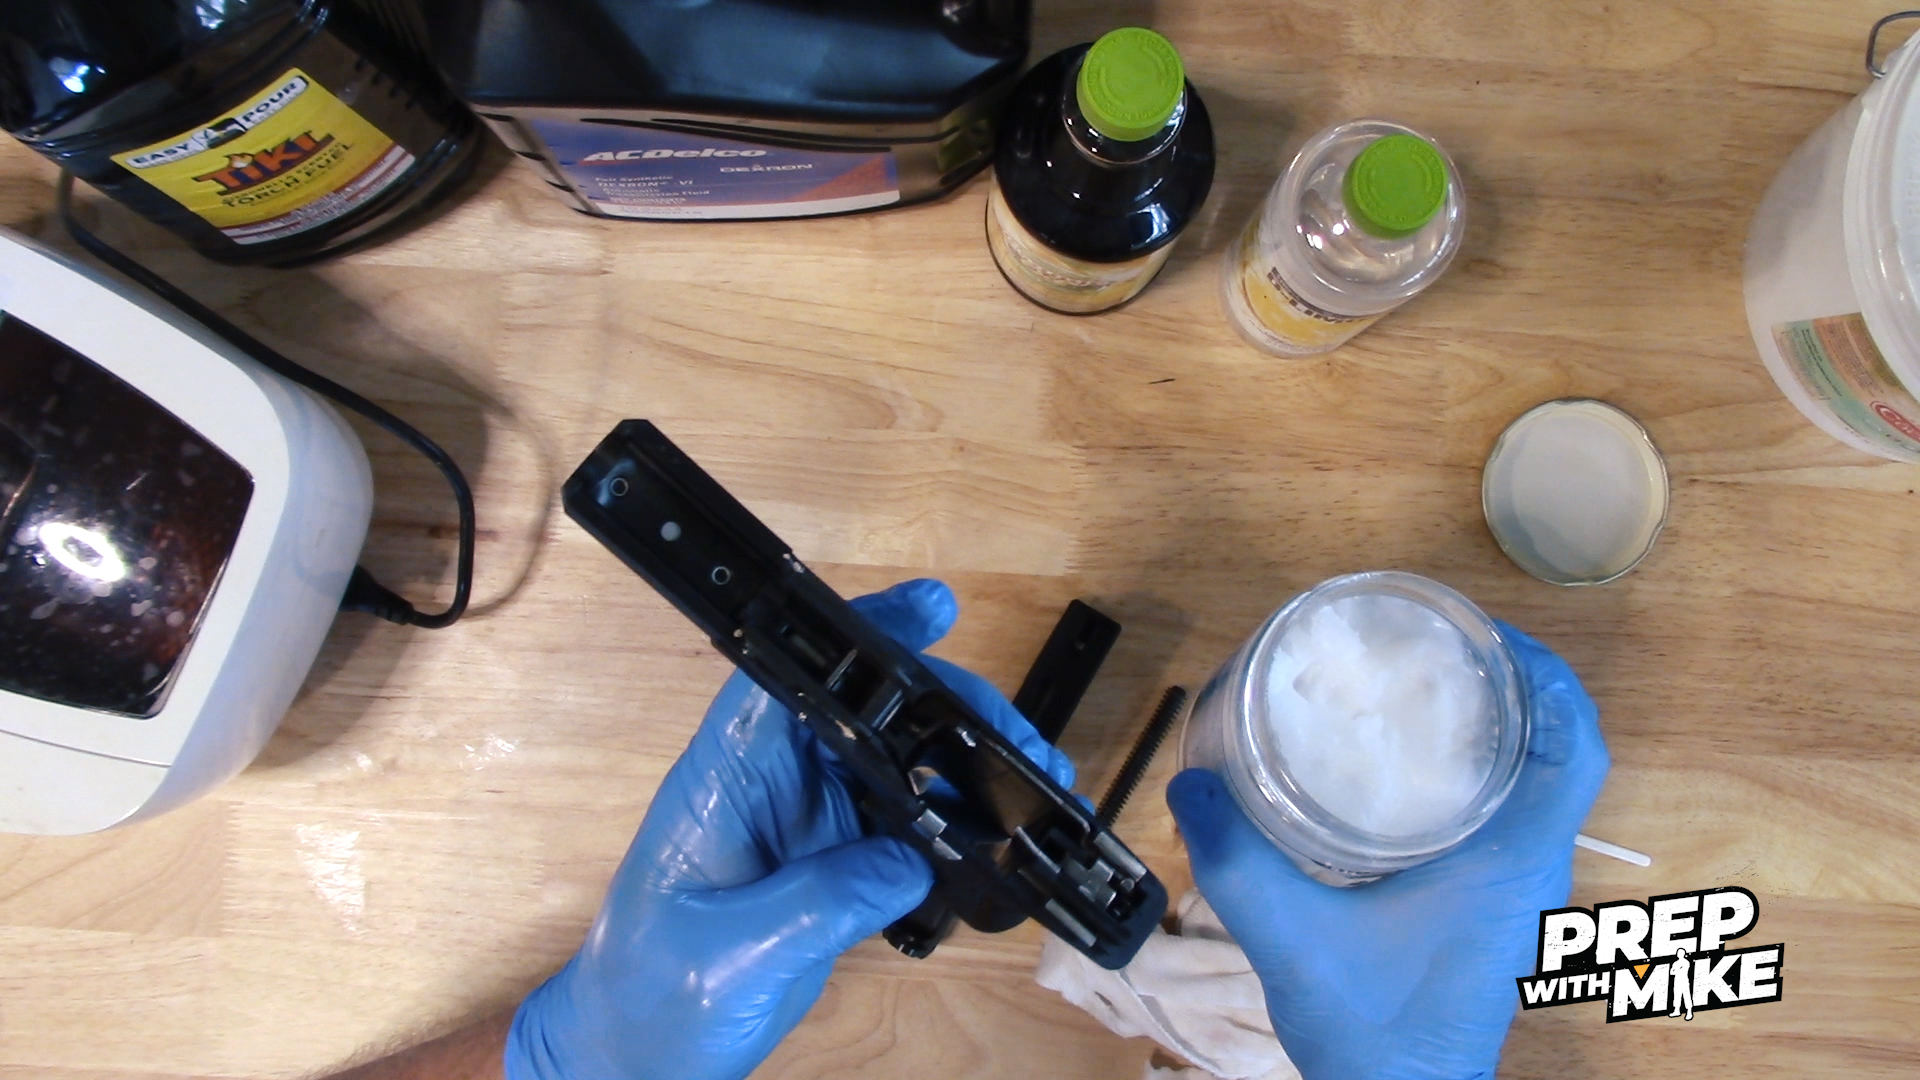 Image: Superfoods for GUNS: How to clean and lubricate firearms using orange peel extracts and COCONUT OIL